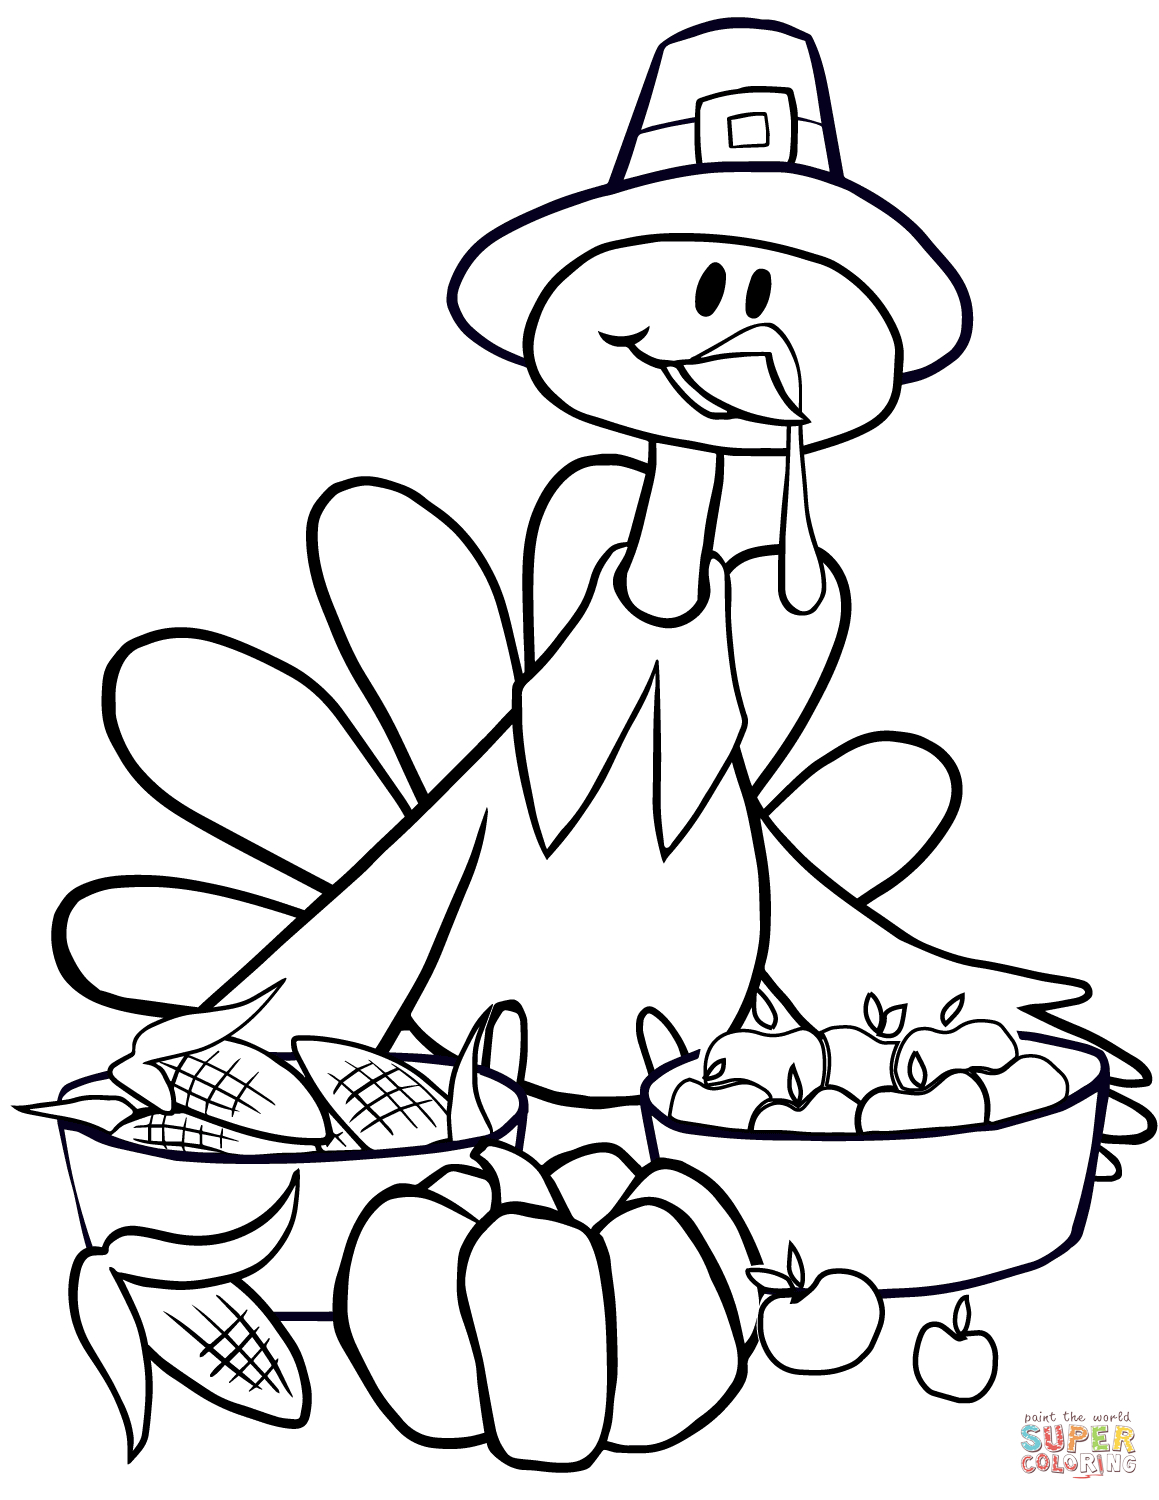 Vegetables Coloring Page Cartoon Turkey With Vegetables Coloring Page Free Printable